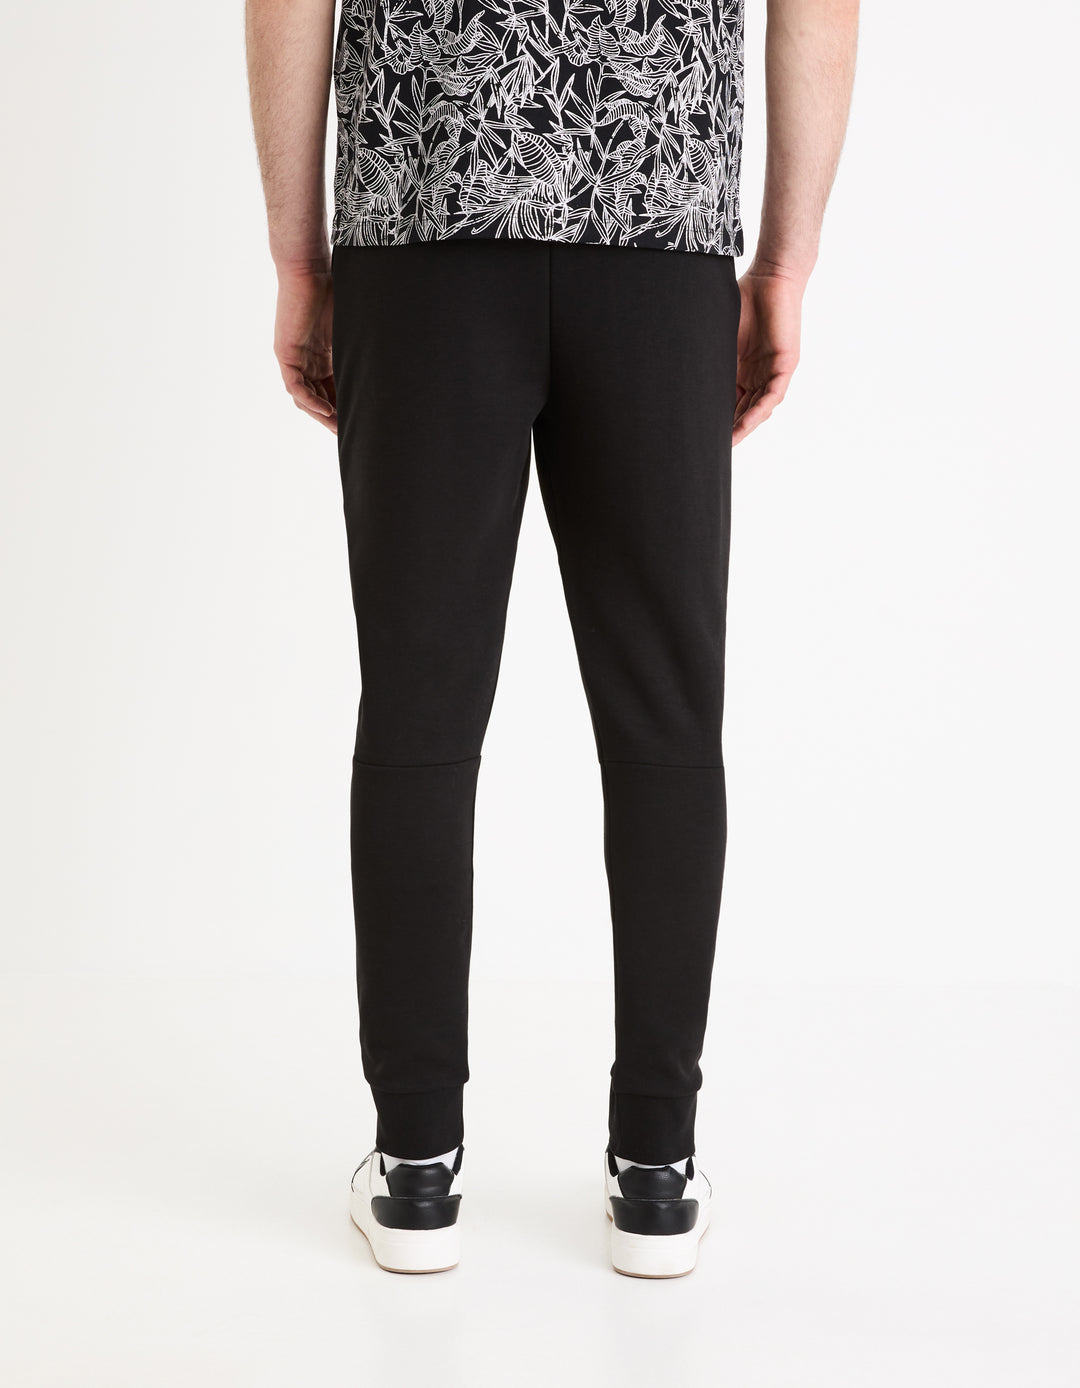 Unisex - Knitted - Pants